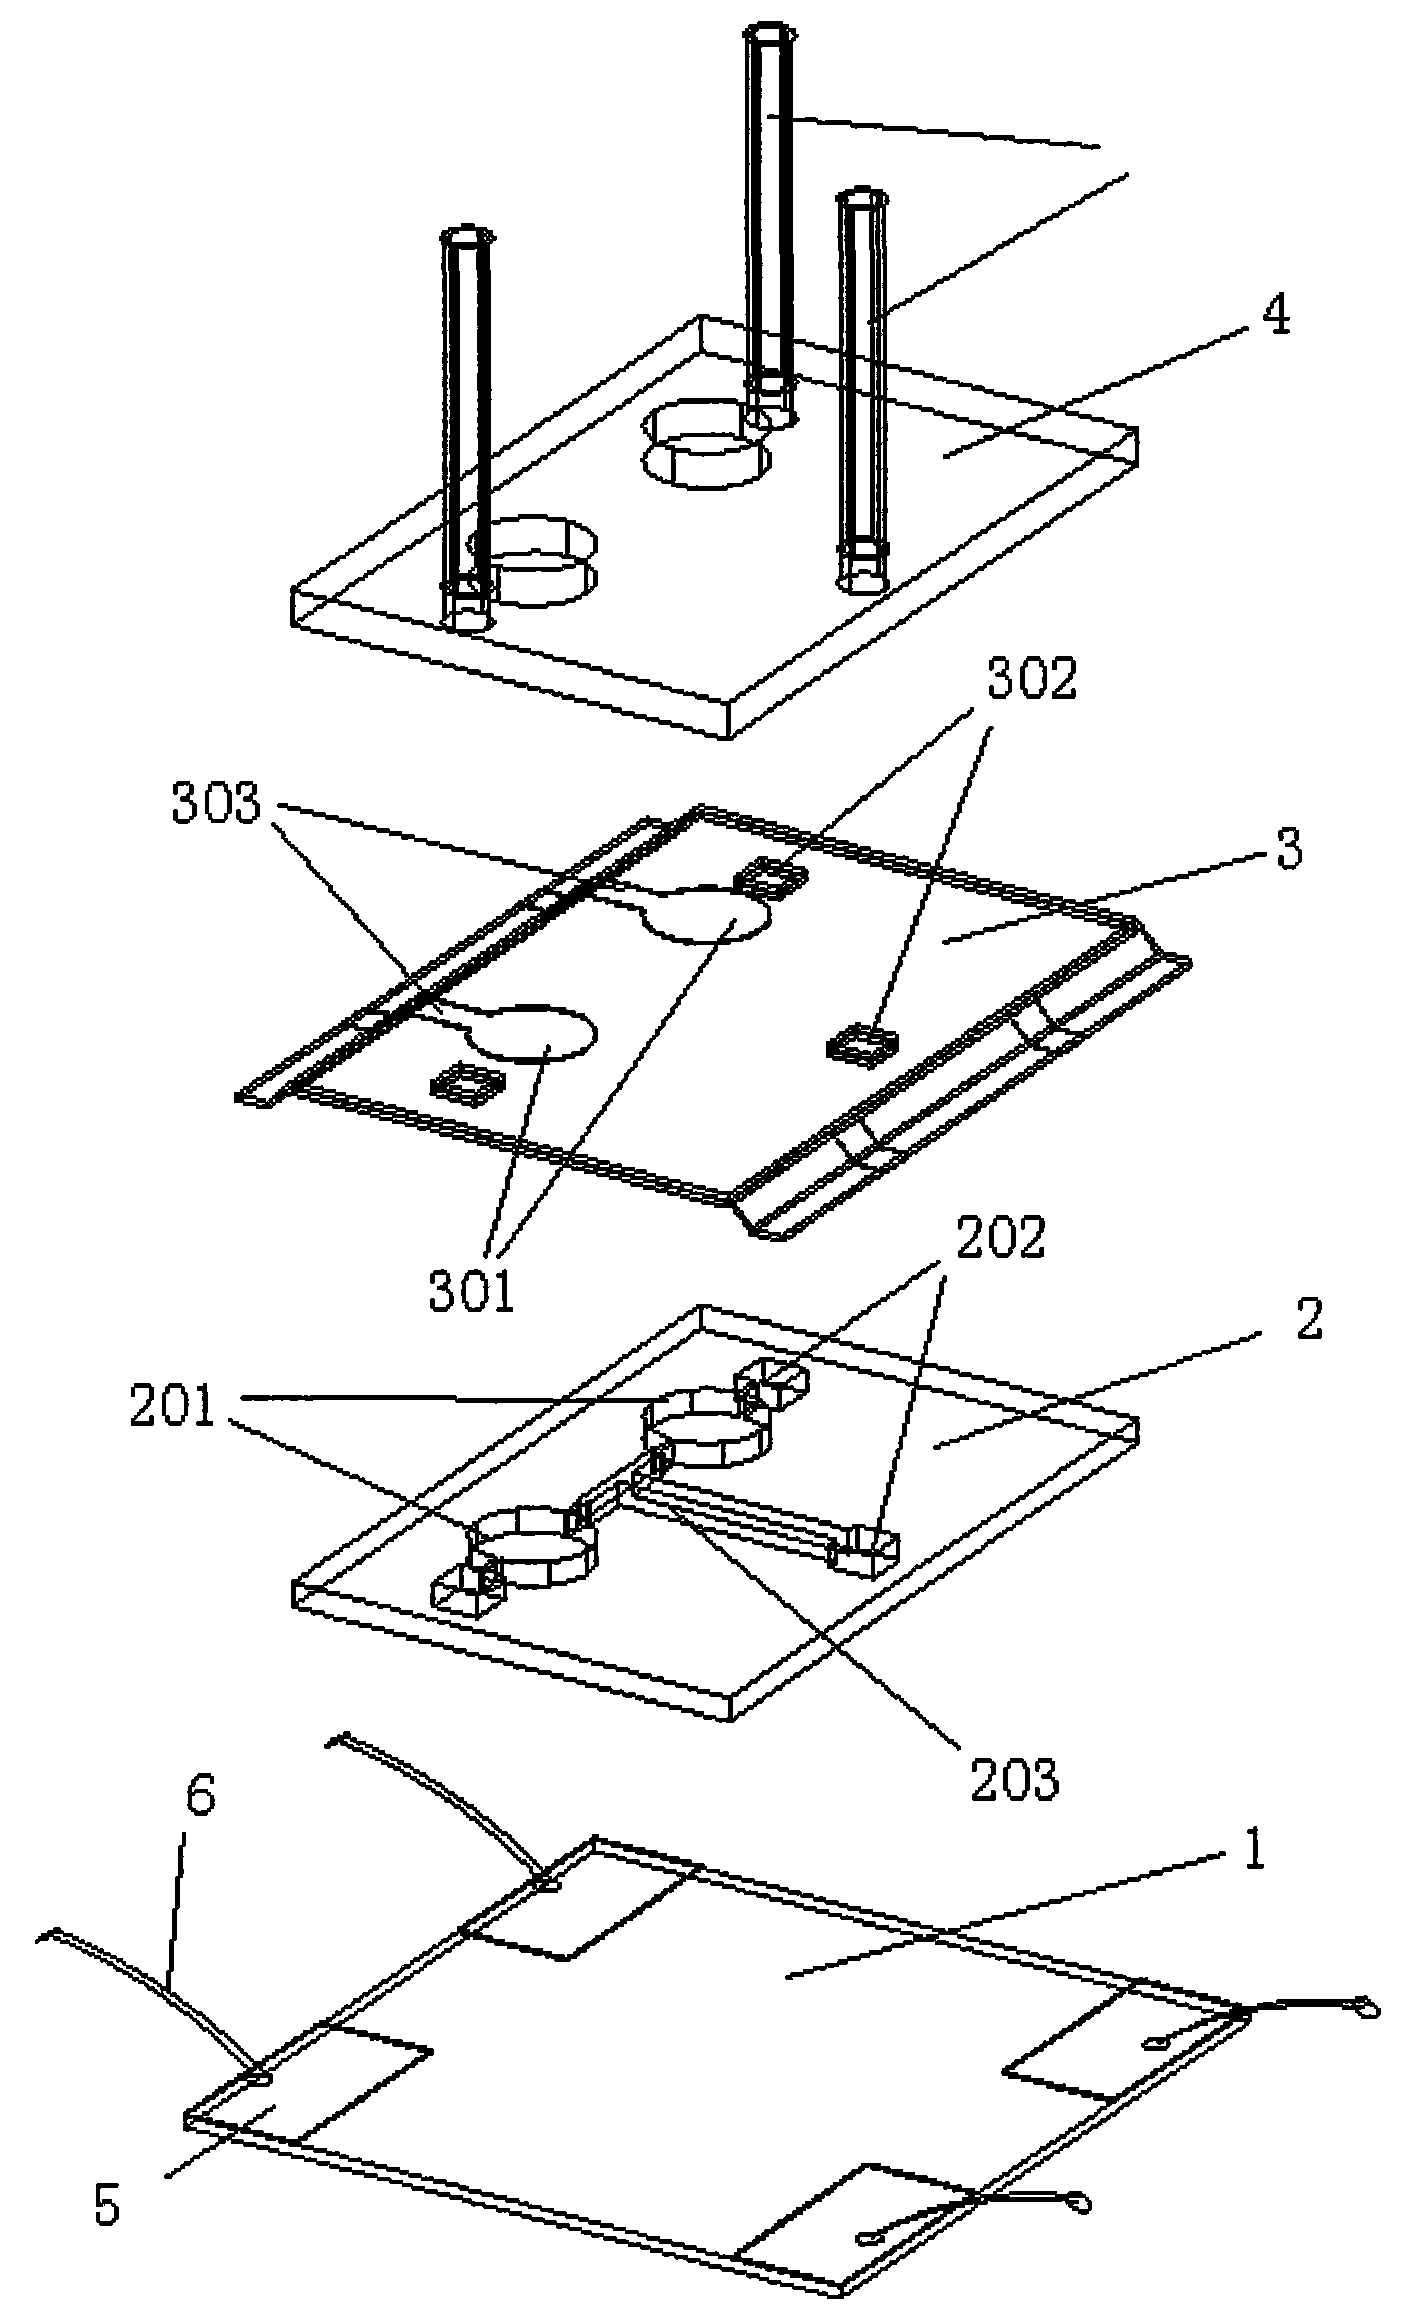 Method for making microfluid system